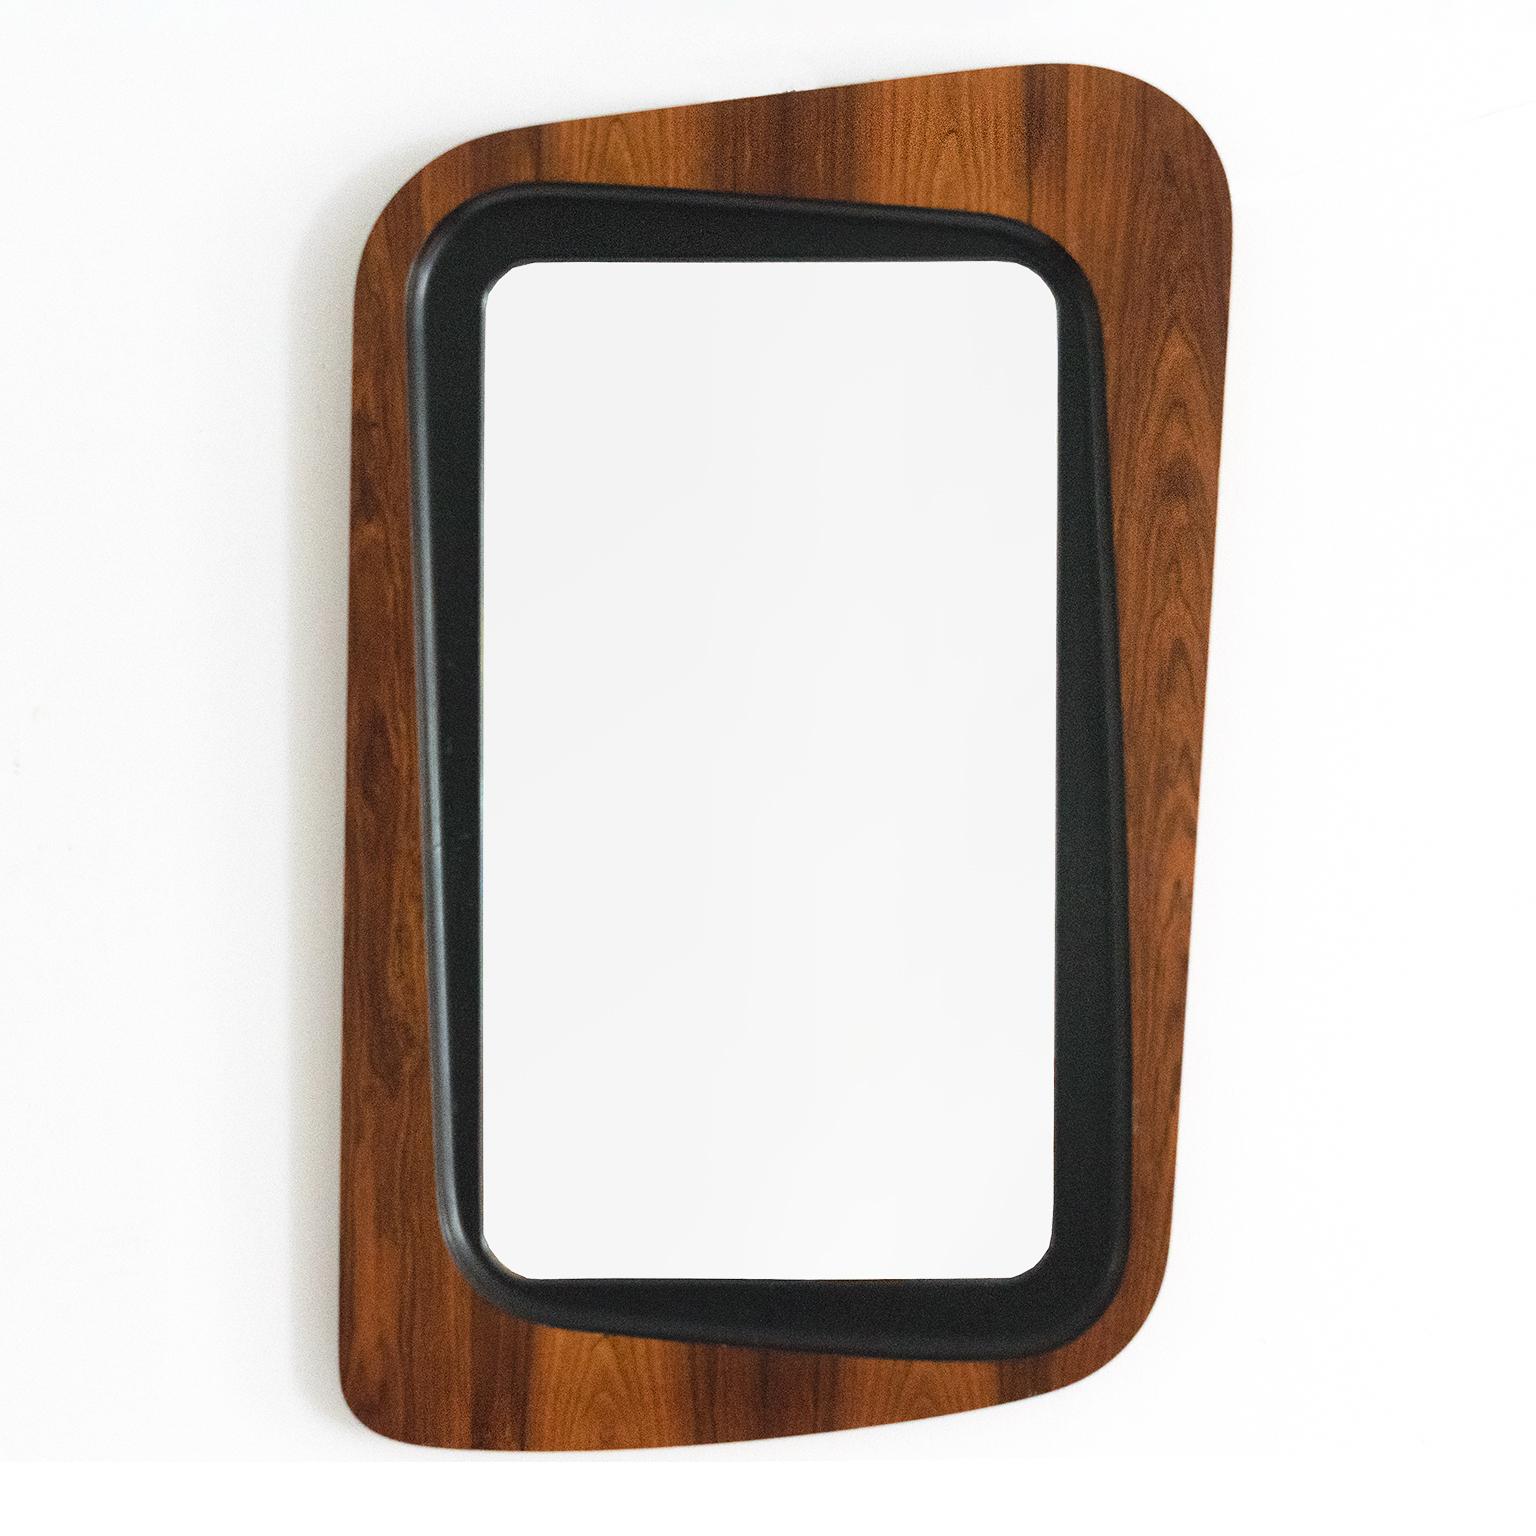 A  Glas & Trä, Hovmantorp made asymmetrical frame wall mirror with rosewood veneer. The inner frame detailed with black lacquer. Made in Sweden circa 1950’s and produced by Glas & Trä, Hovmantorp. 

Height: 33 Width: 22” Depth: 1.25”